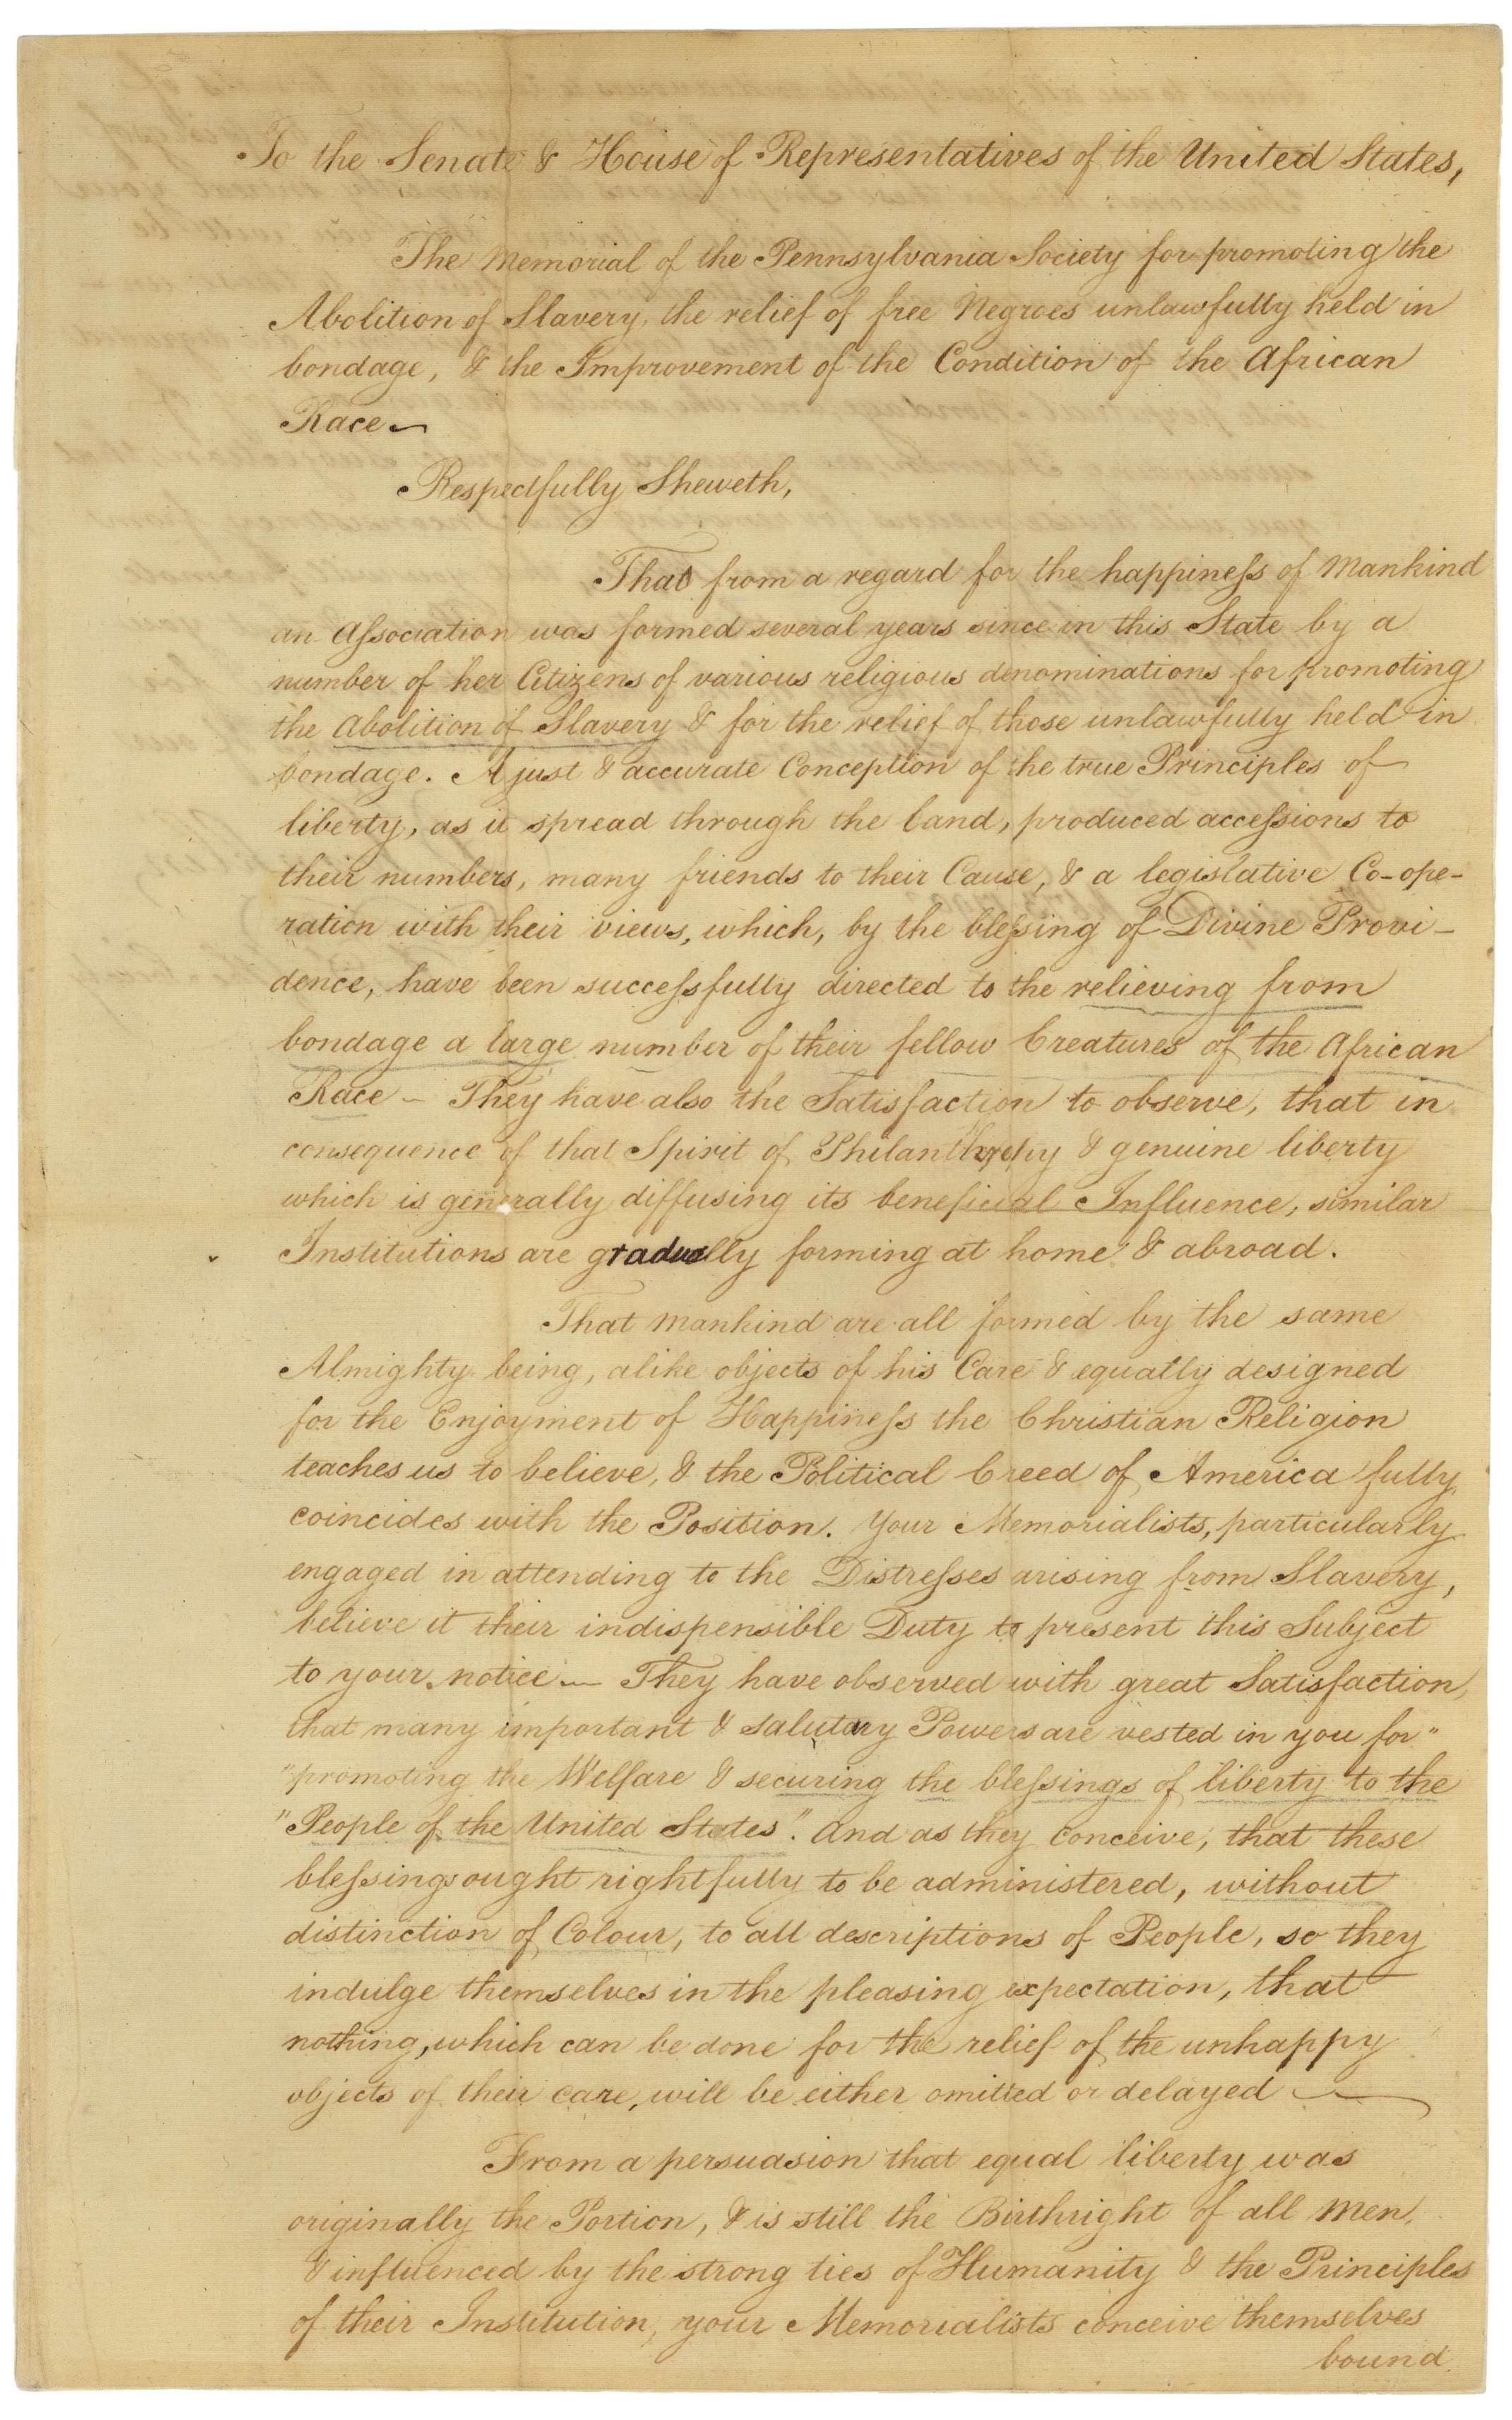 Letter from Benjamin Franklin to Vice President John Adams with Petition from the Pennsylvania Society for Promoting the Abolition of Slavery